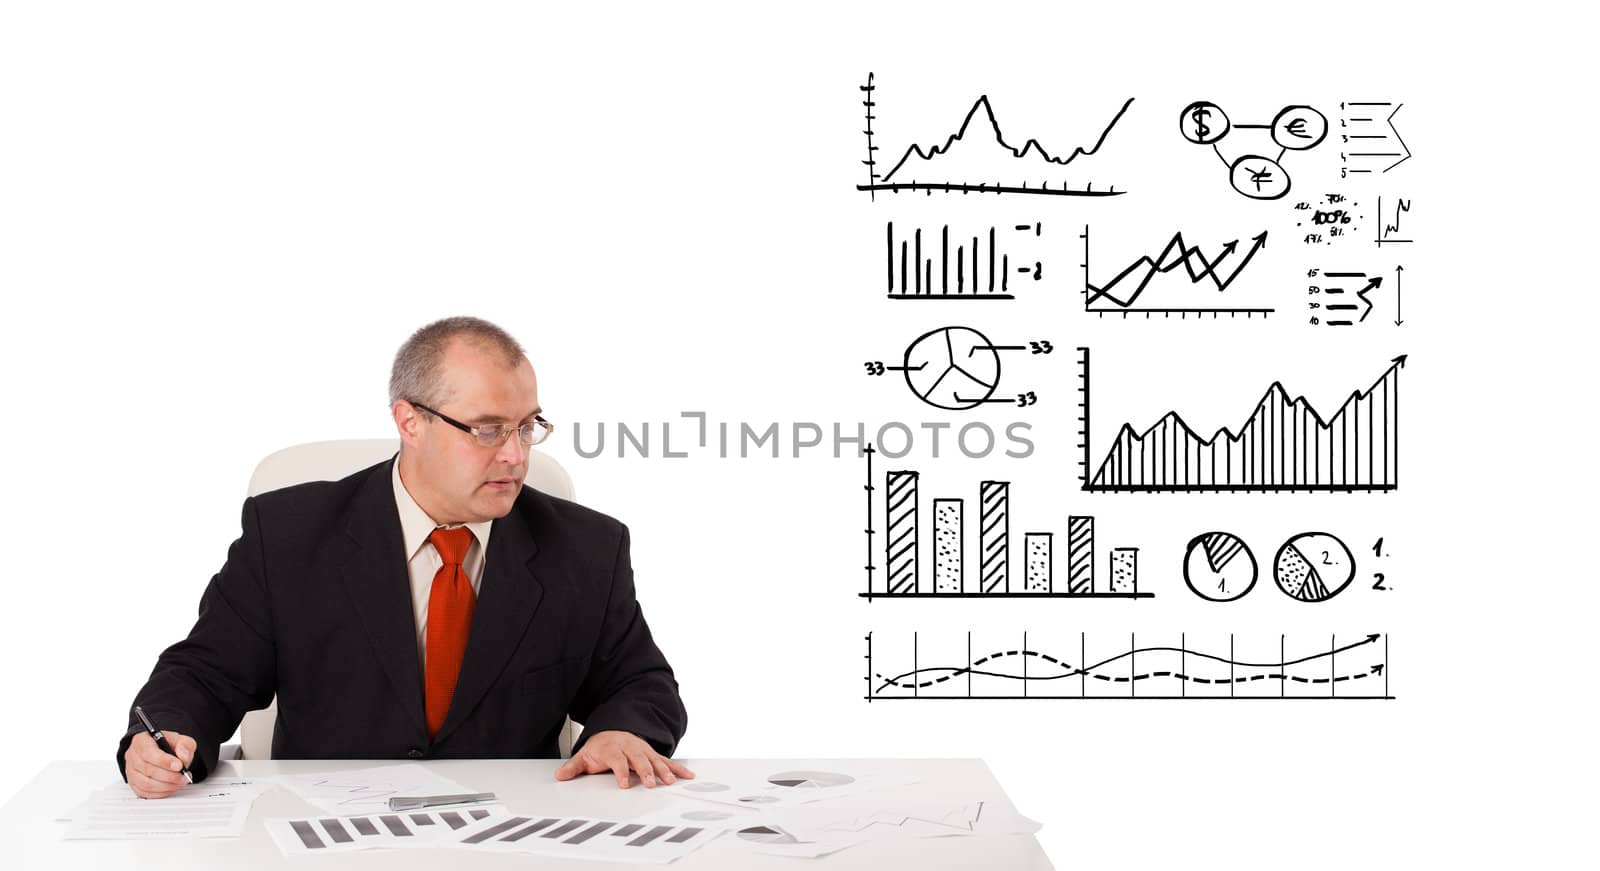 businessman sitting at desk with statistics and graphs, isolated on white